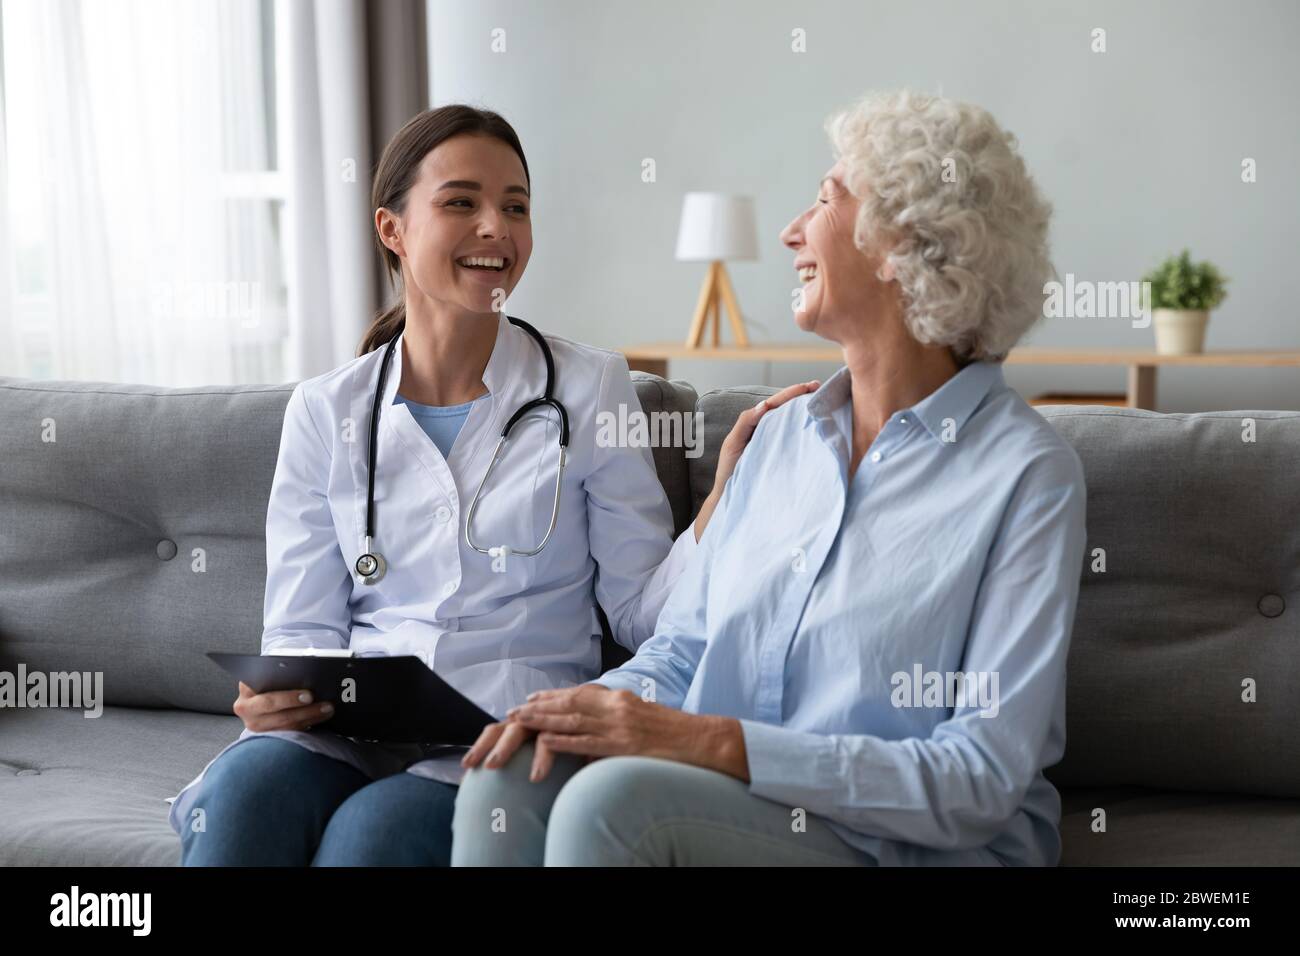 Friendly nurse laughing with elderly female patient during homecare visit Stock Photo